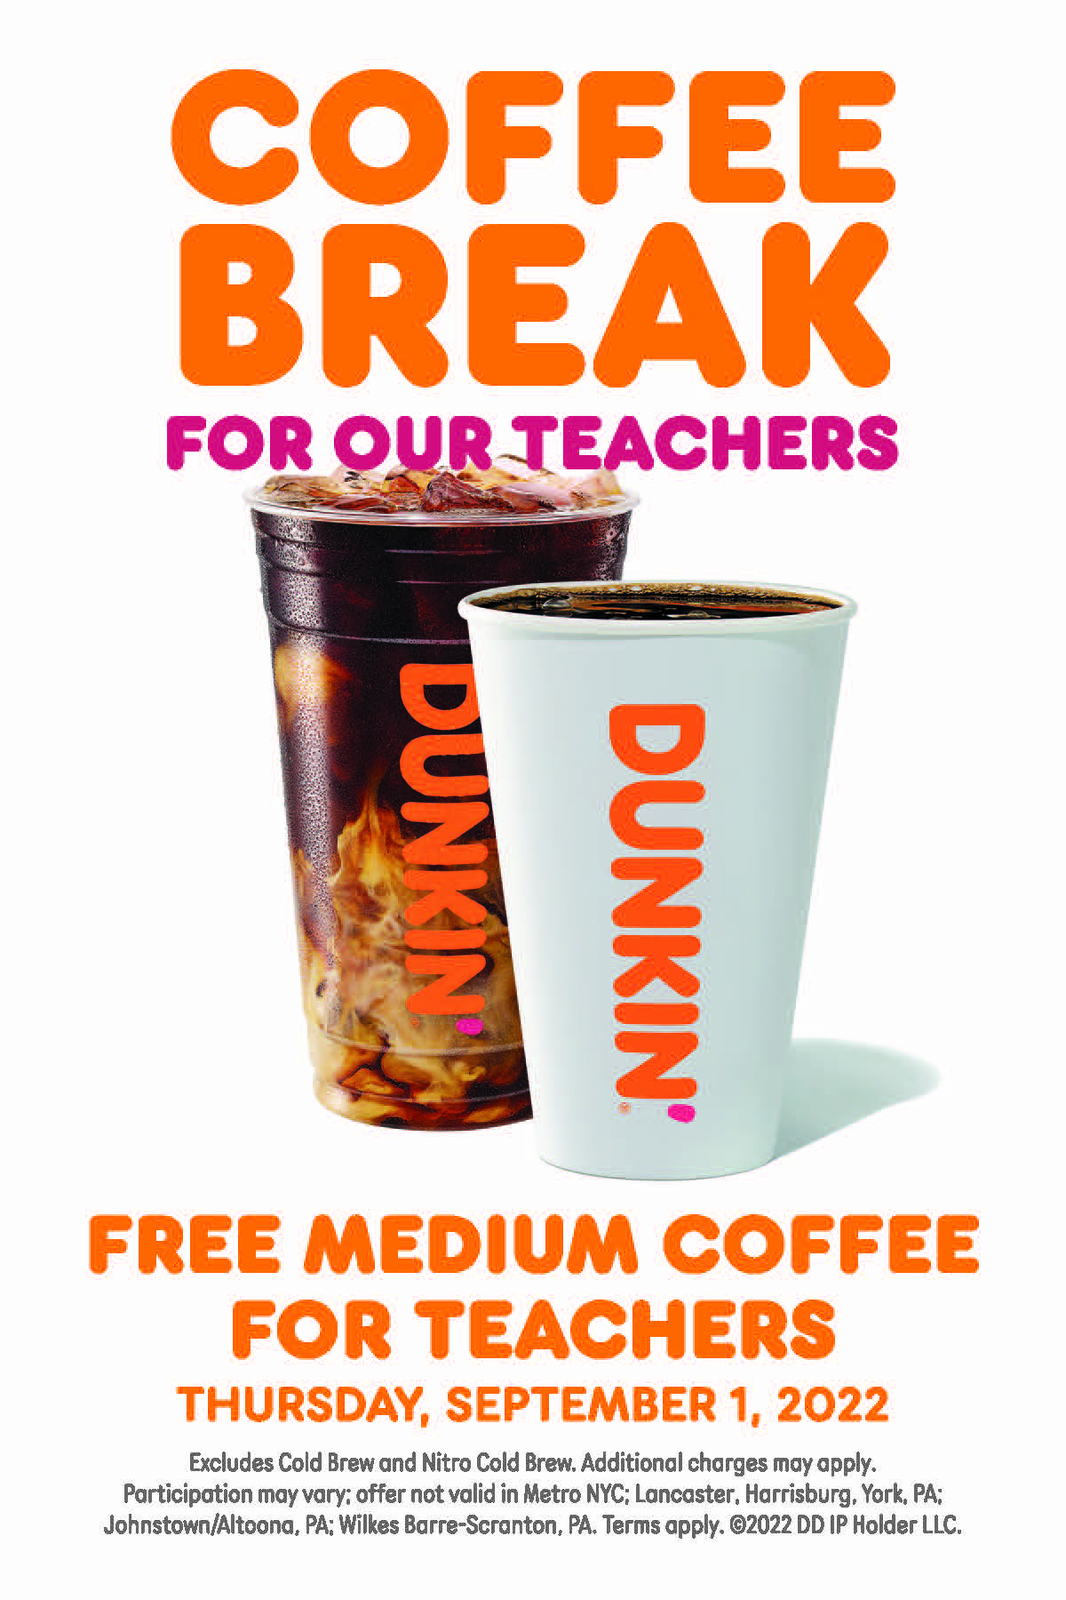 FREE Medium Hot or Iced Coffee for Teachers at Dunkin’ Donuts on September 1st